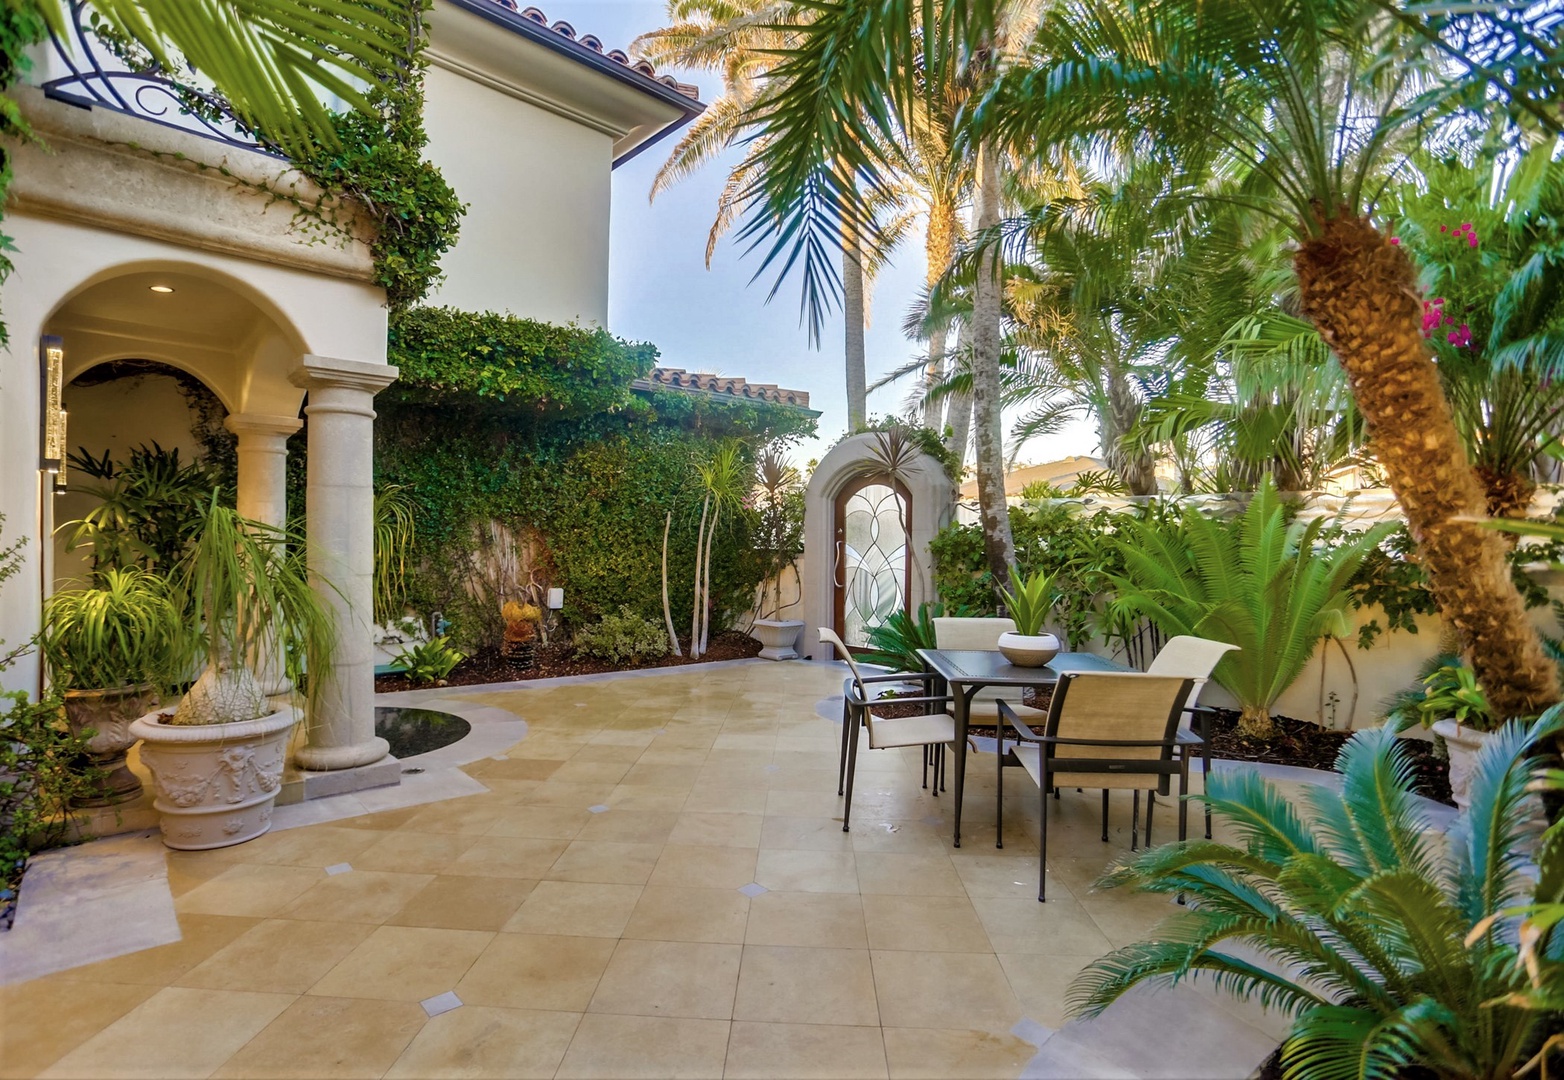 Private front courtyard